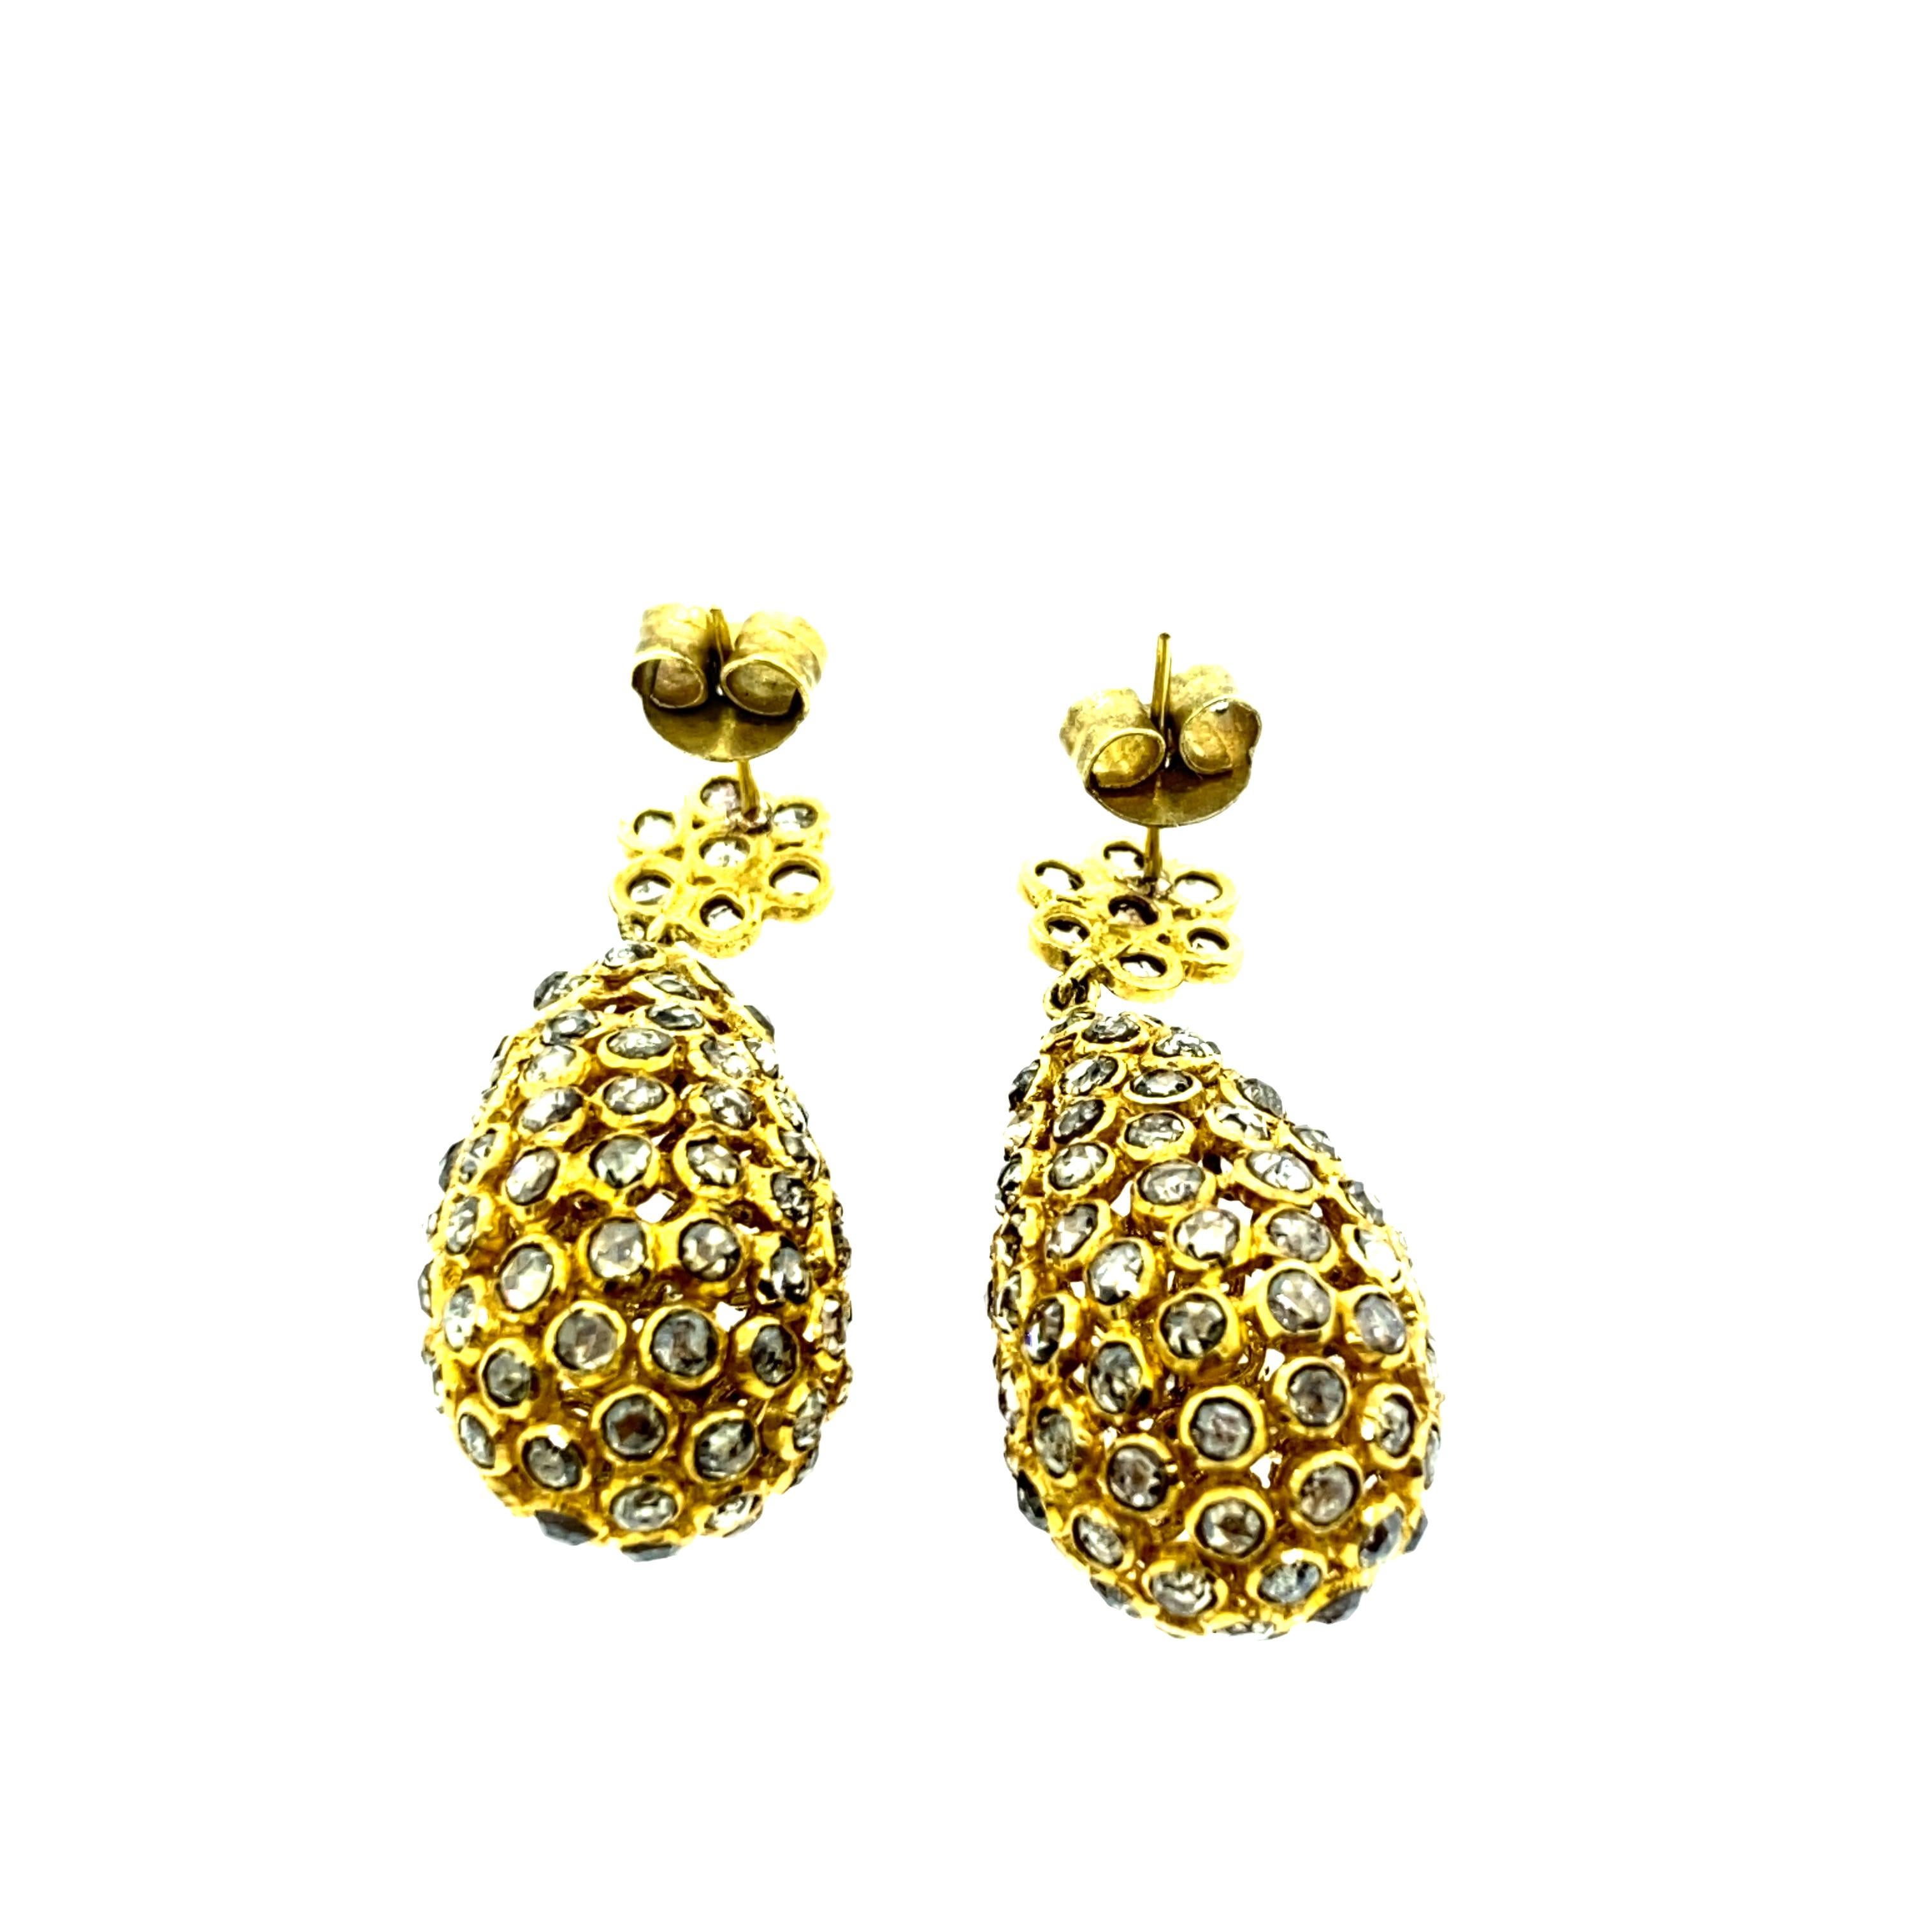 10 Carat Diamond Earring in 18 Karat Yellow Gold In New Condition For Sale In New York, NY